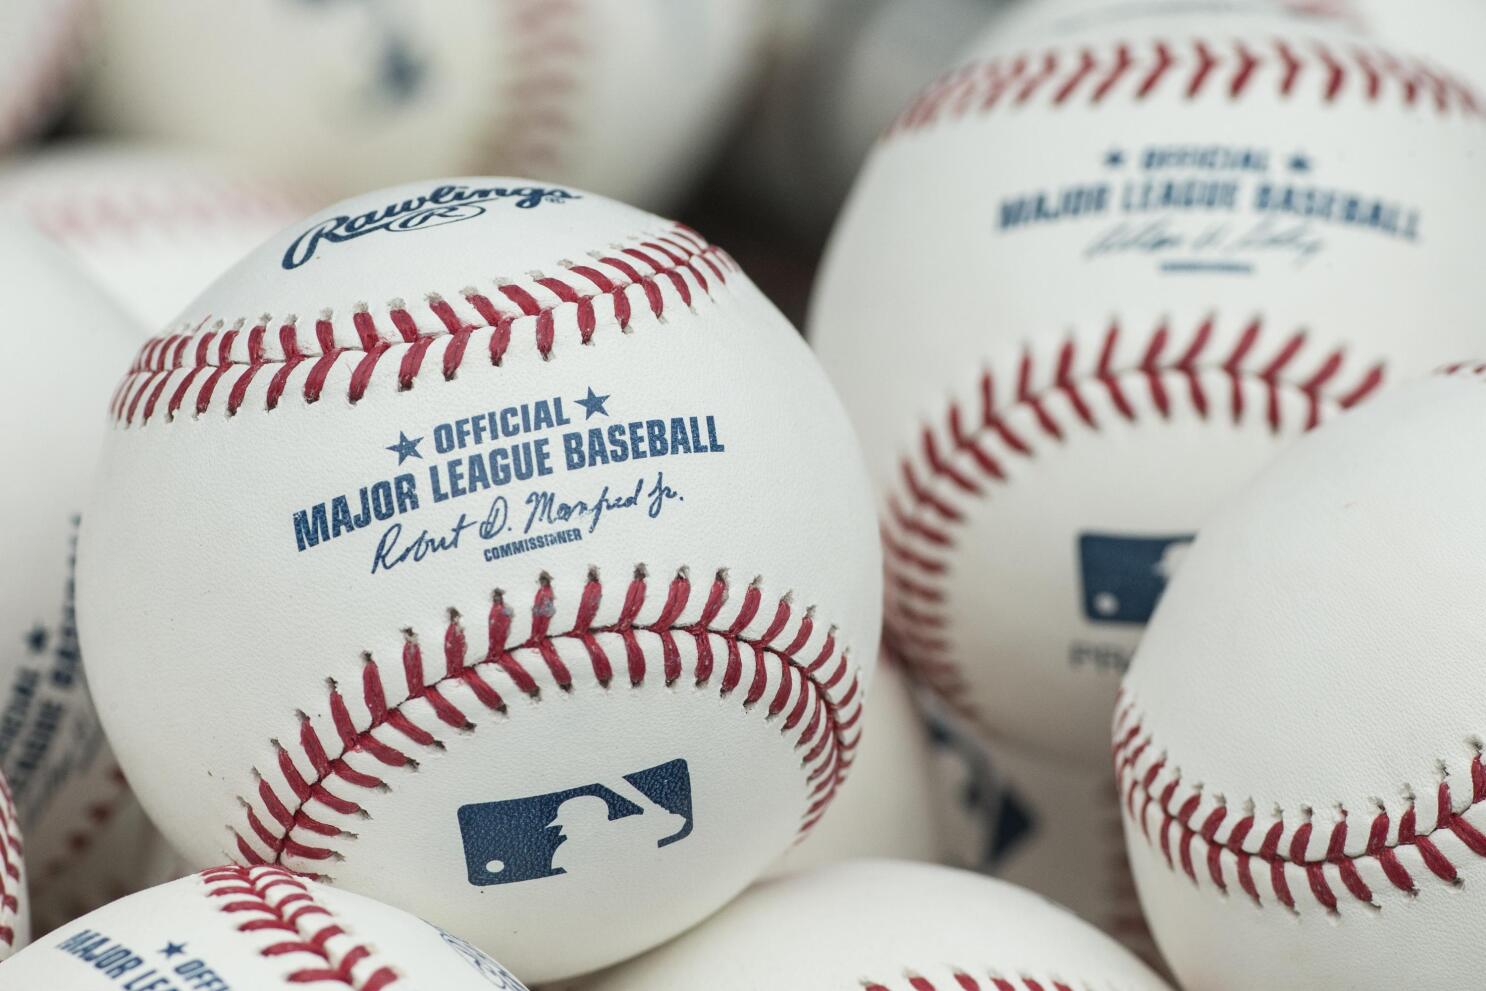 MLB not requiring COVID-19 vaccines for minor leaguers